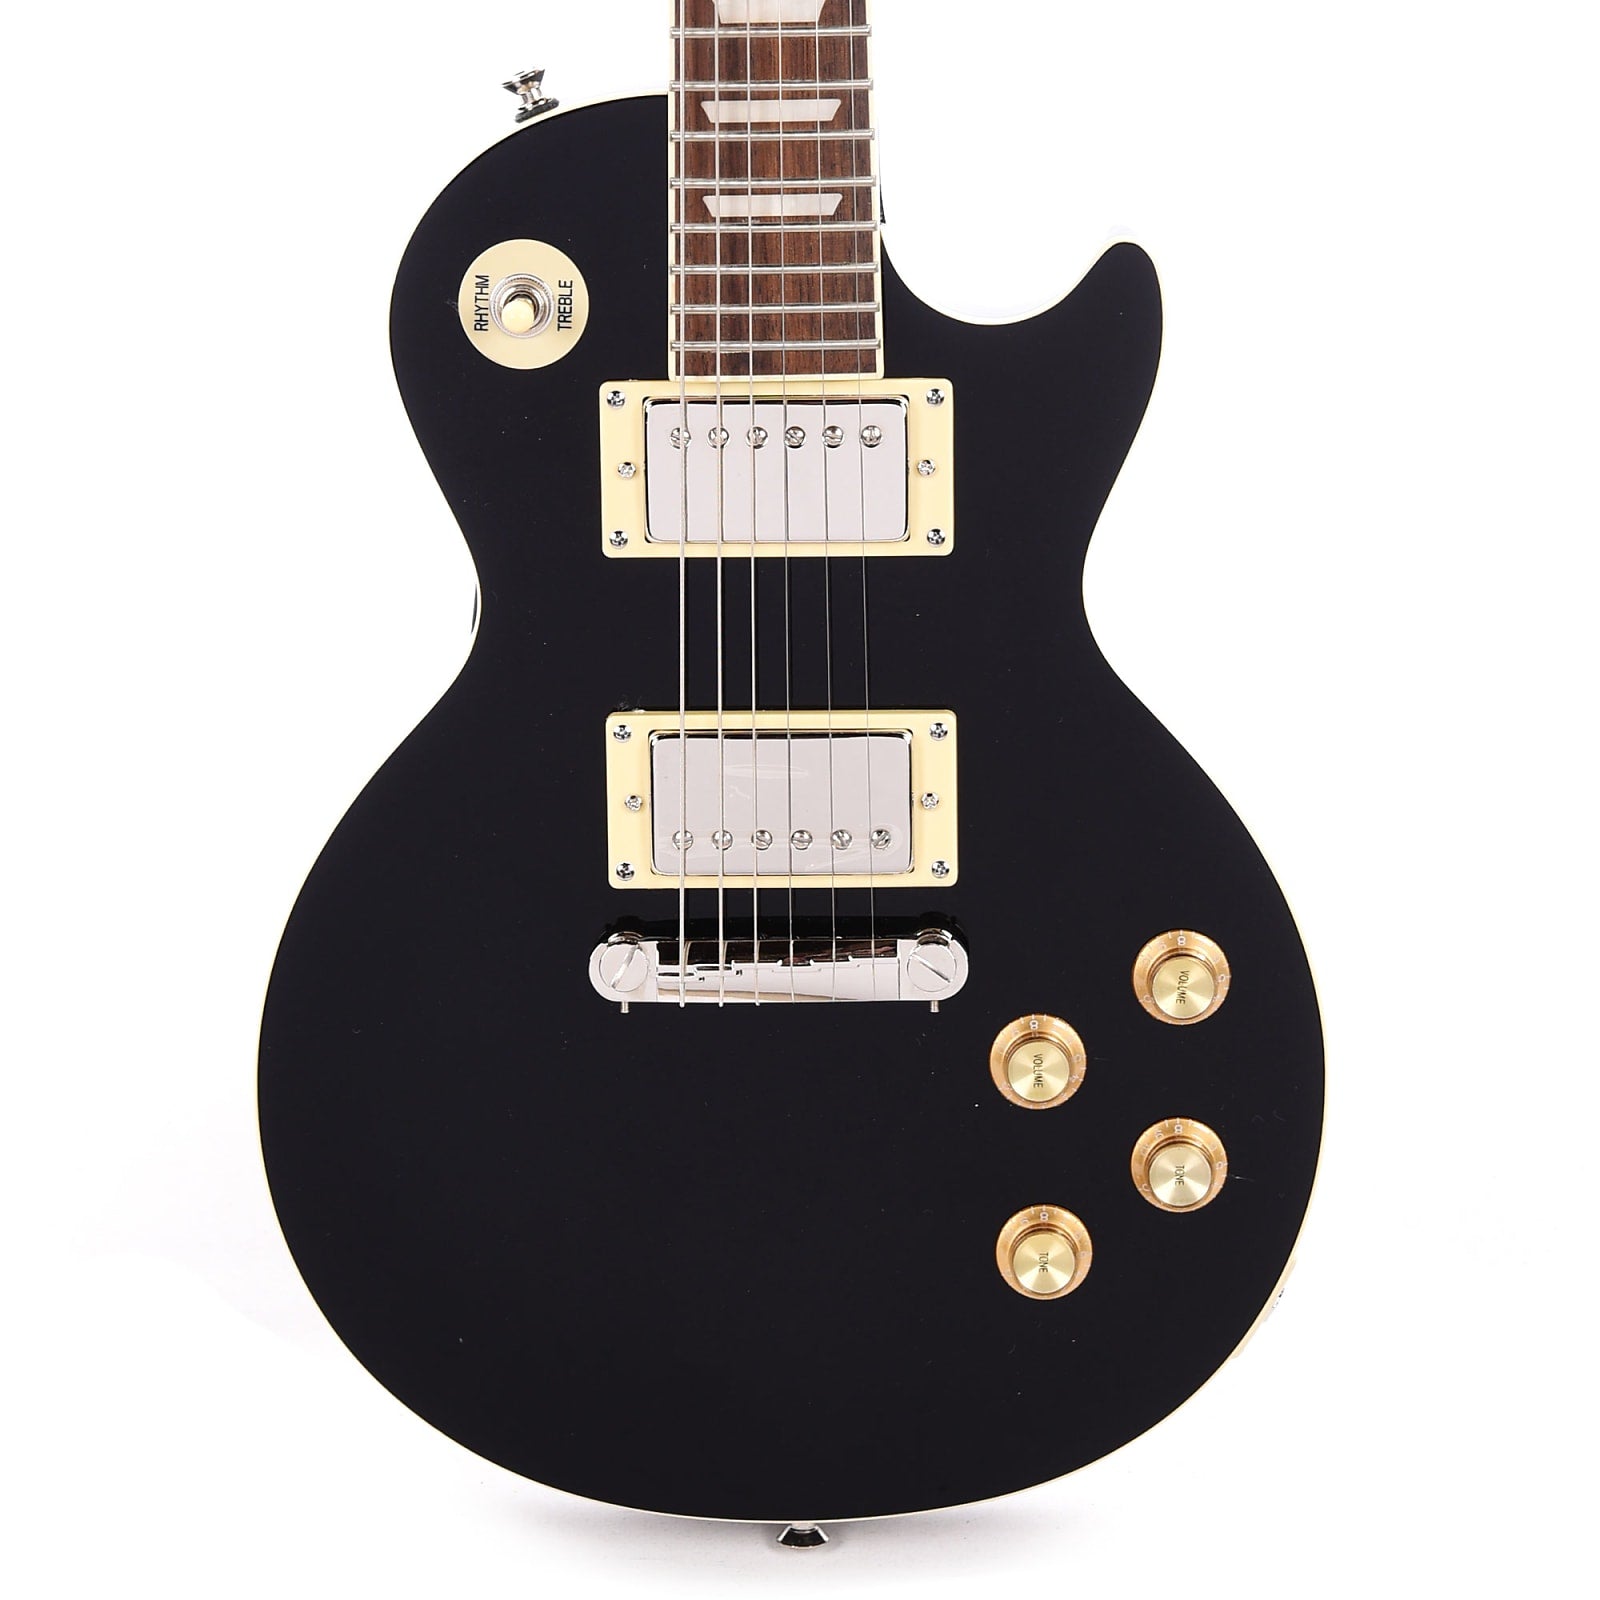 Best Electric Guitar for Kids Epiphone Power Players Les Paul Electric Guitar - Dark Matter Ebony (Gig Bag, Cable, Picks Included) | Zoso Music Sdn Bhd